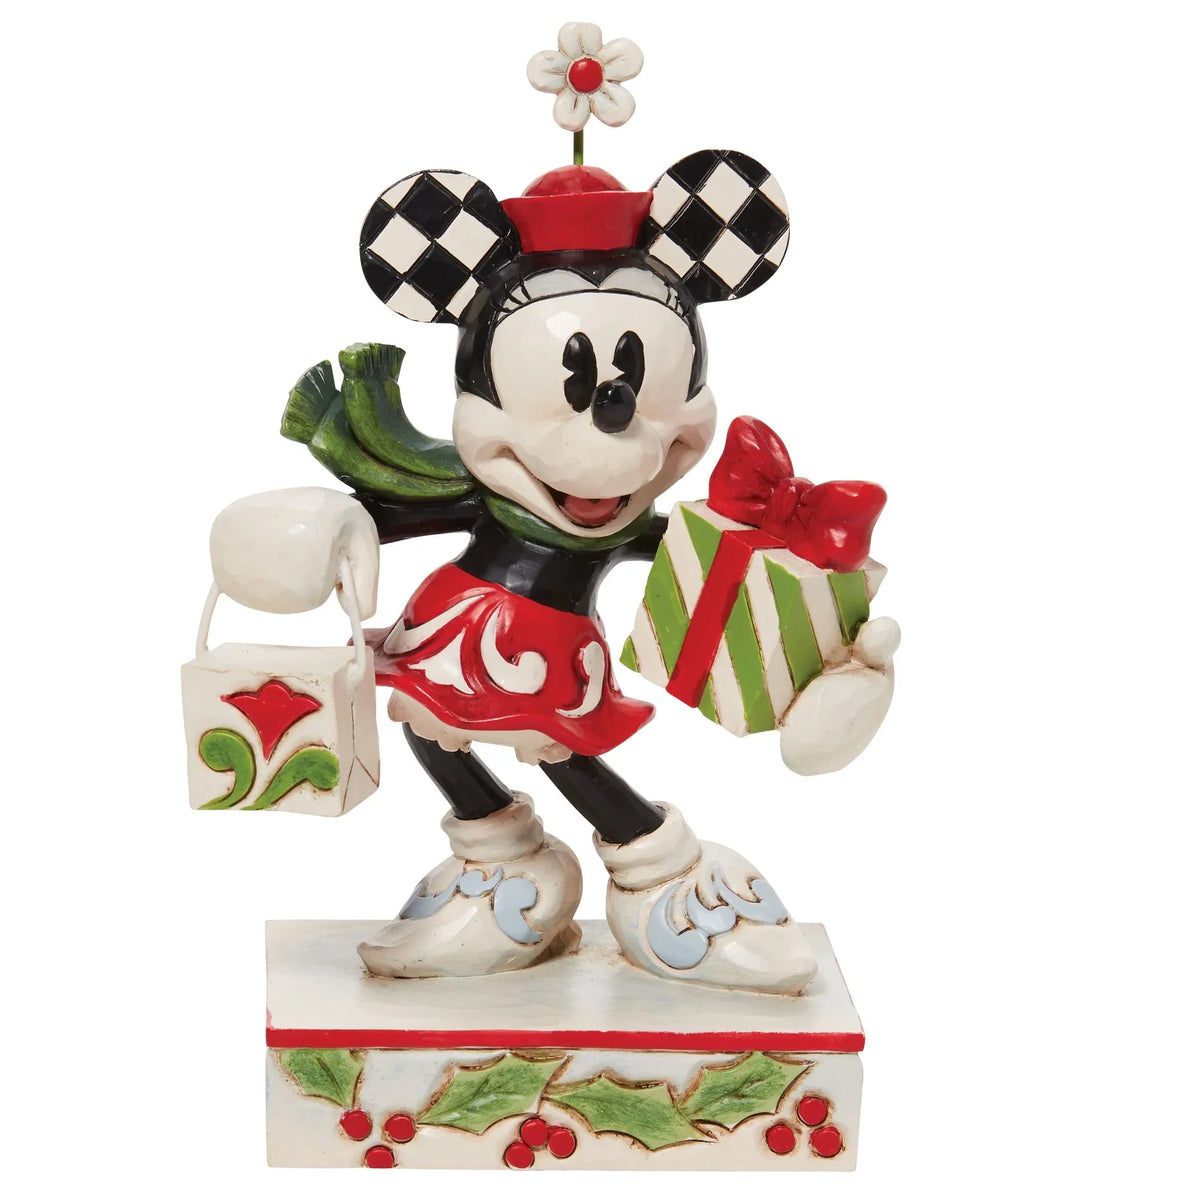 Minnie with bag and gift - Disney Traditions